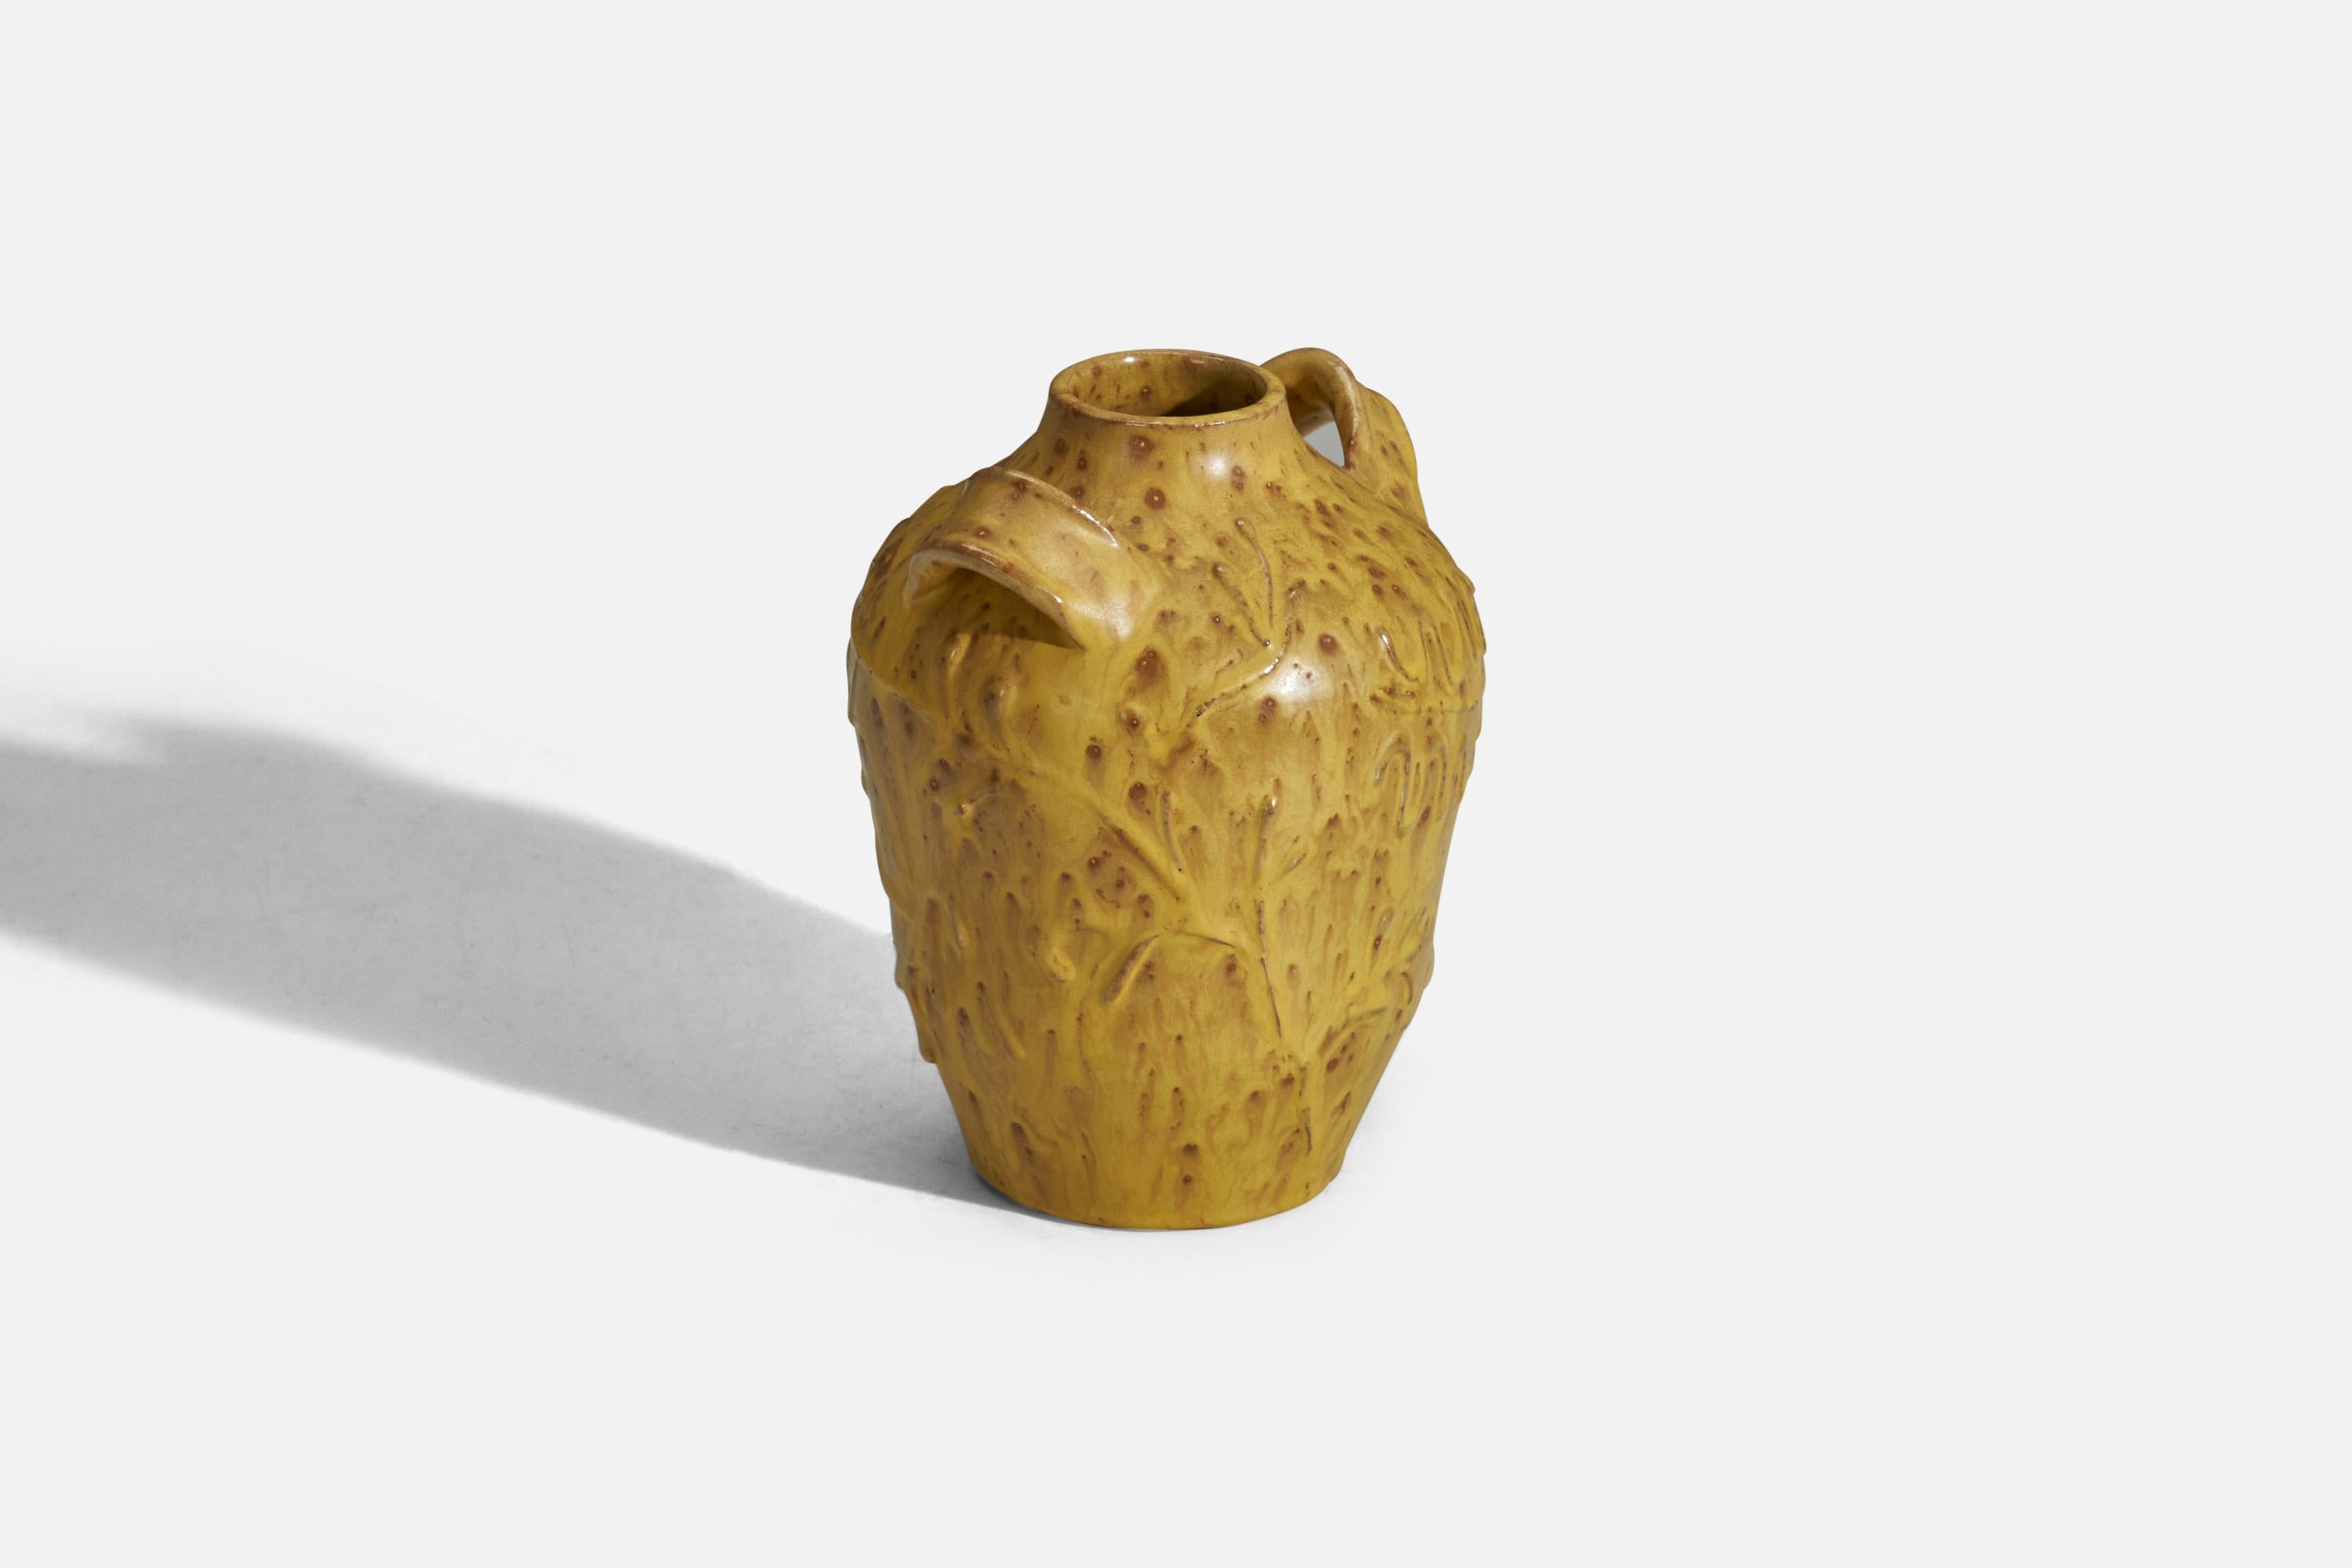 A yellow glazed earthenware vase designed and produced by Nittsjö, Sweden, 1940s.